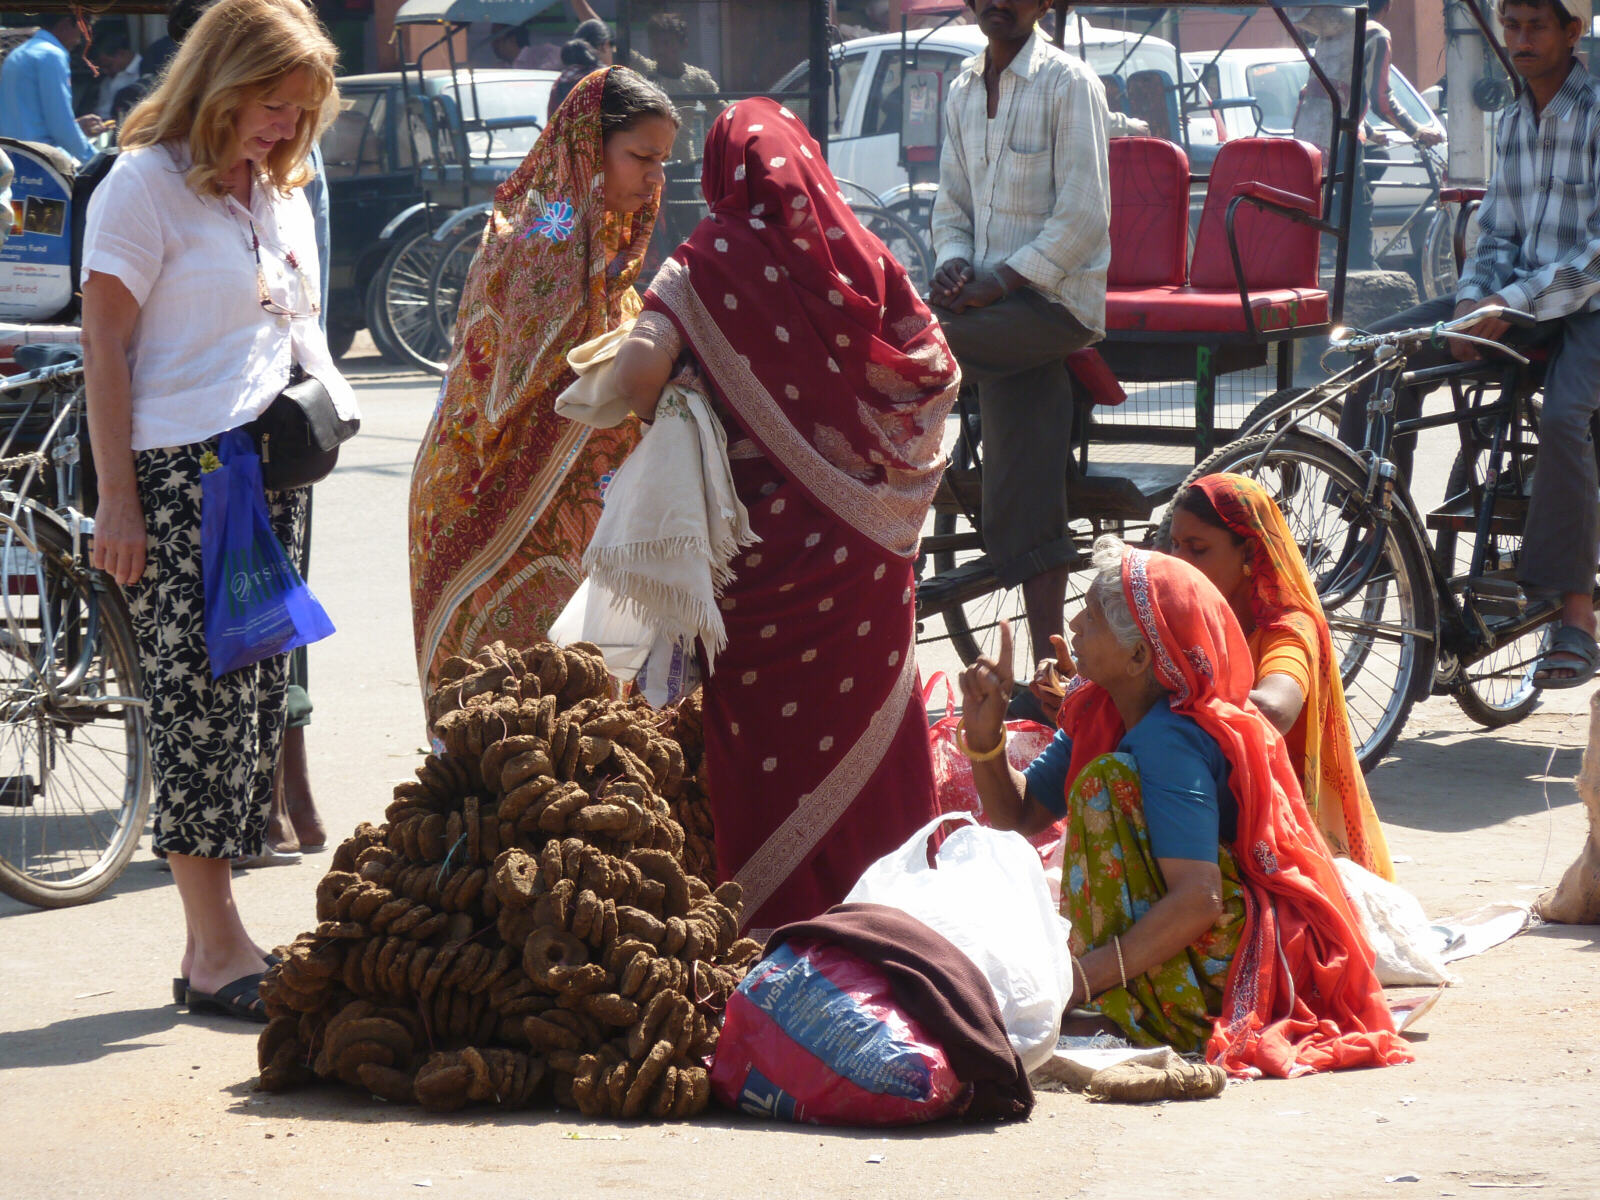 The cow-dung section of the market in Jaipur, Rajasthan